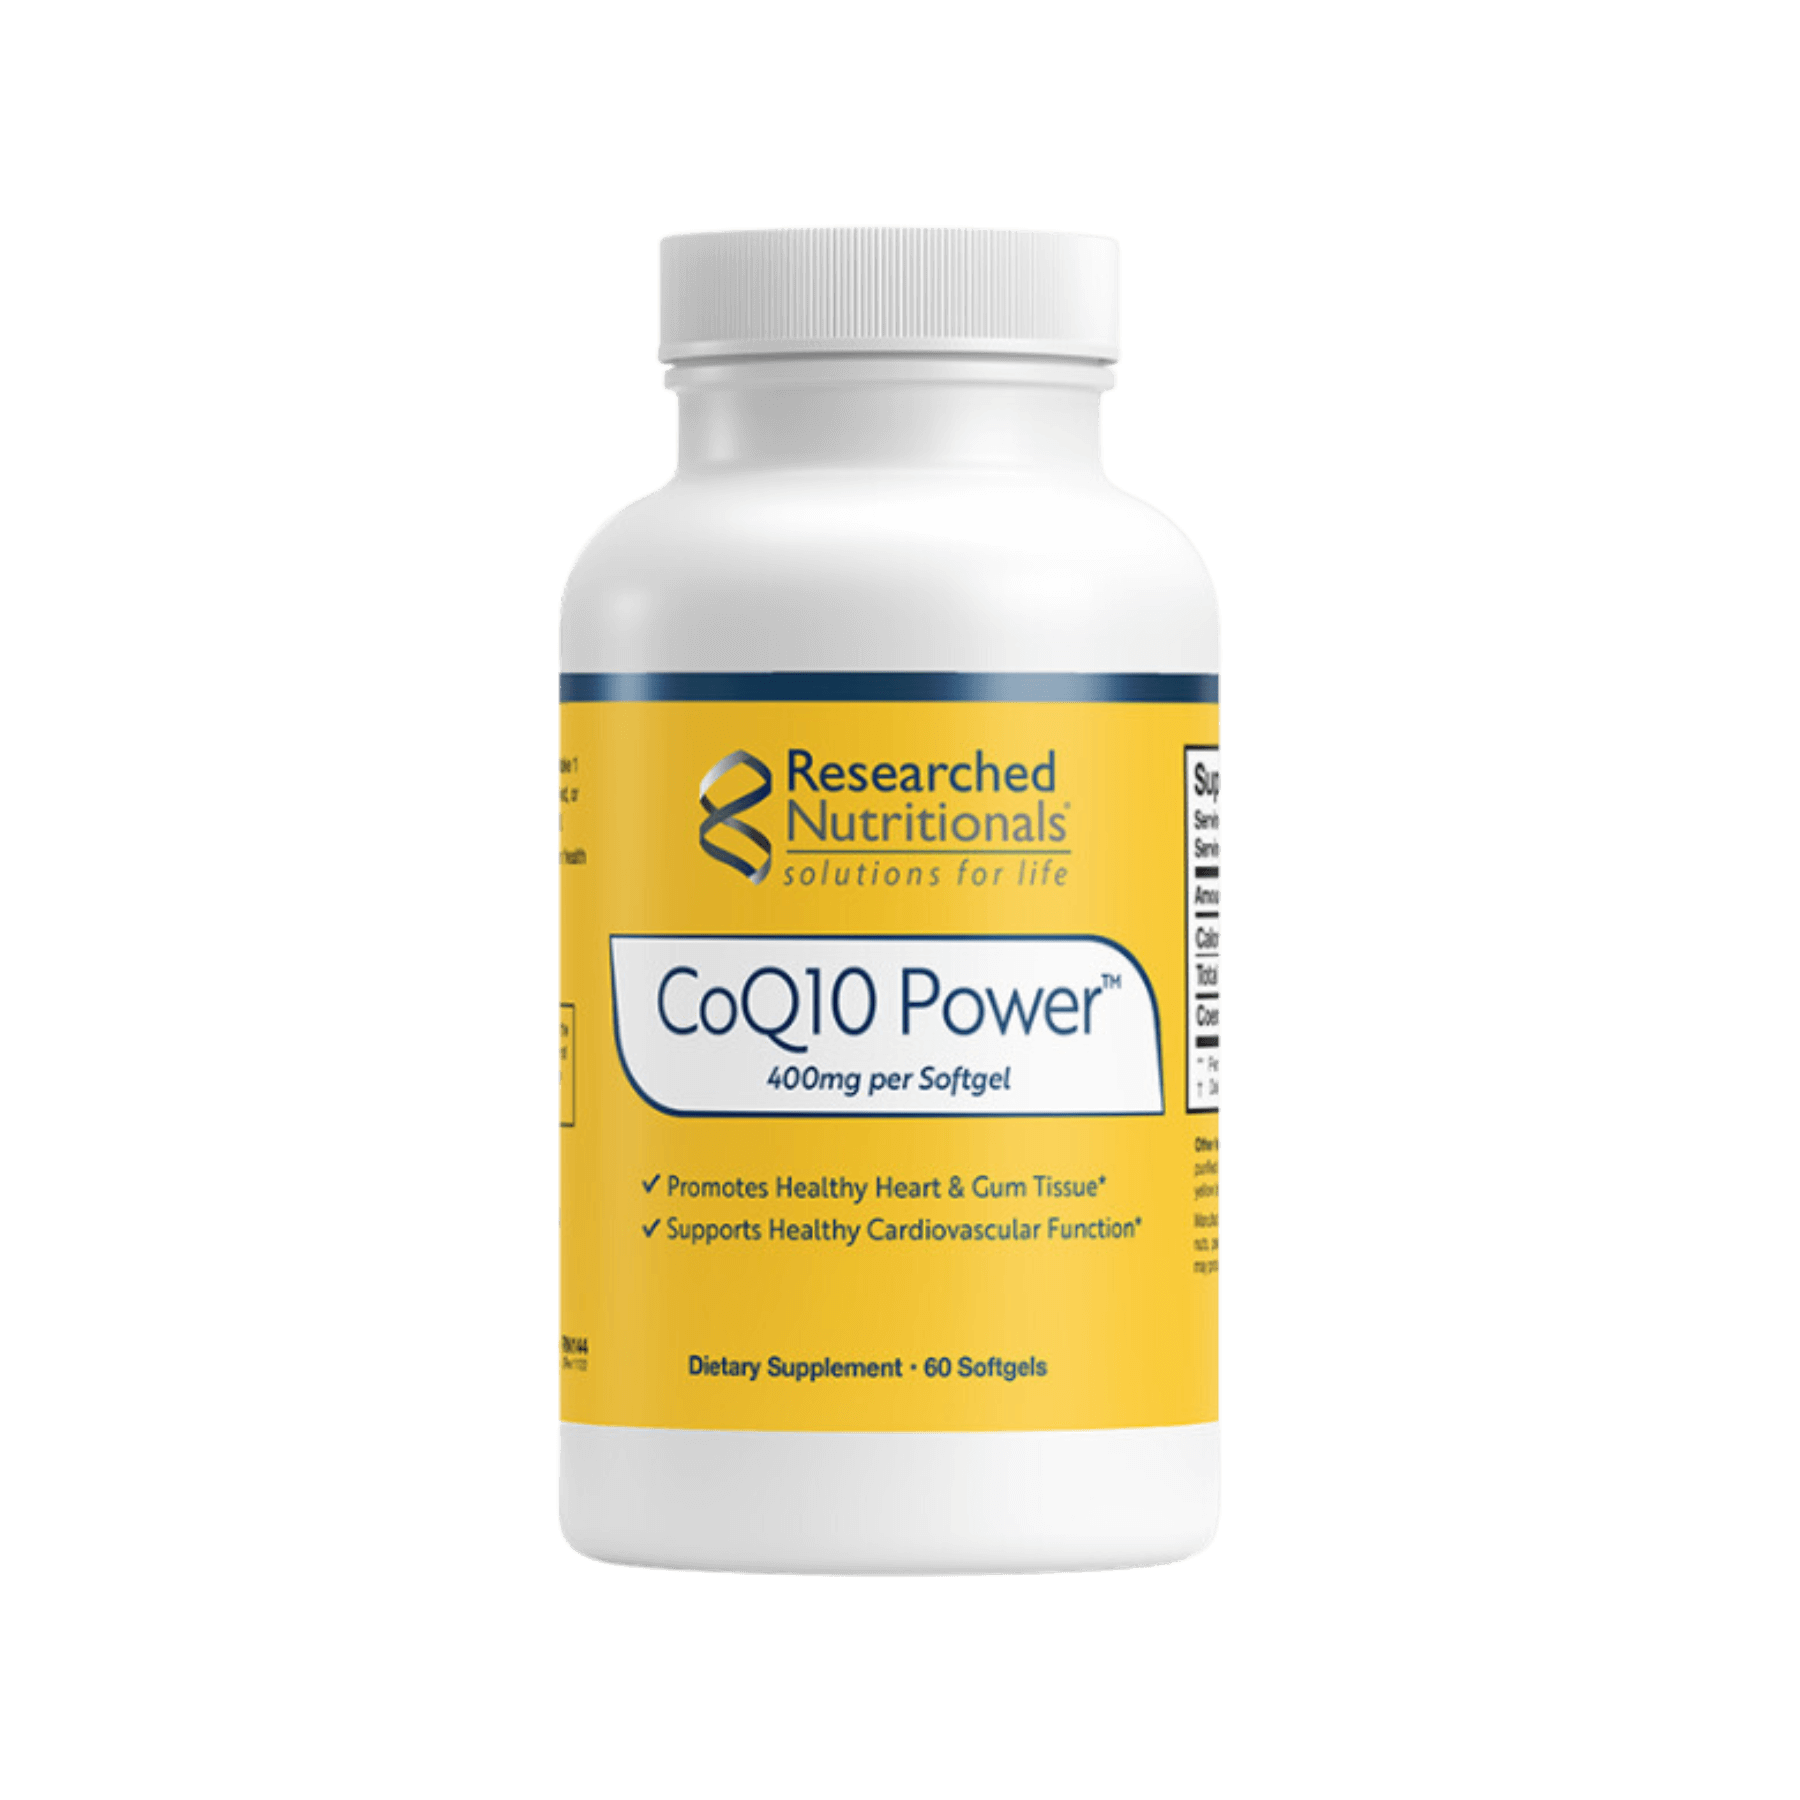 Researched Nutritionals CoQ10 Power Softgels